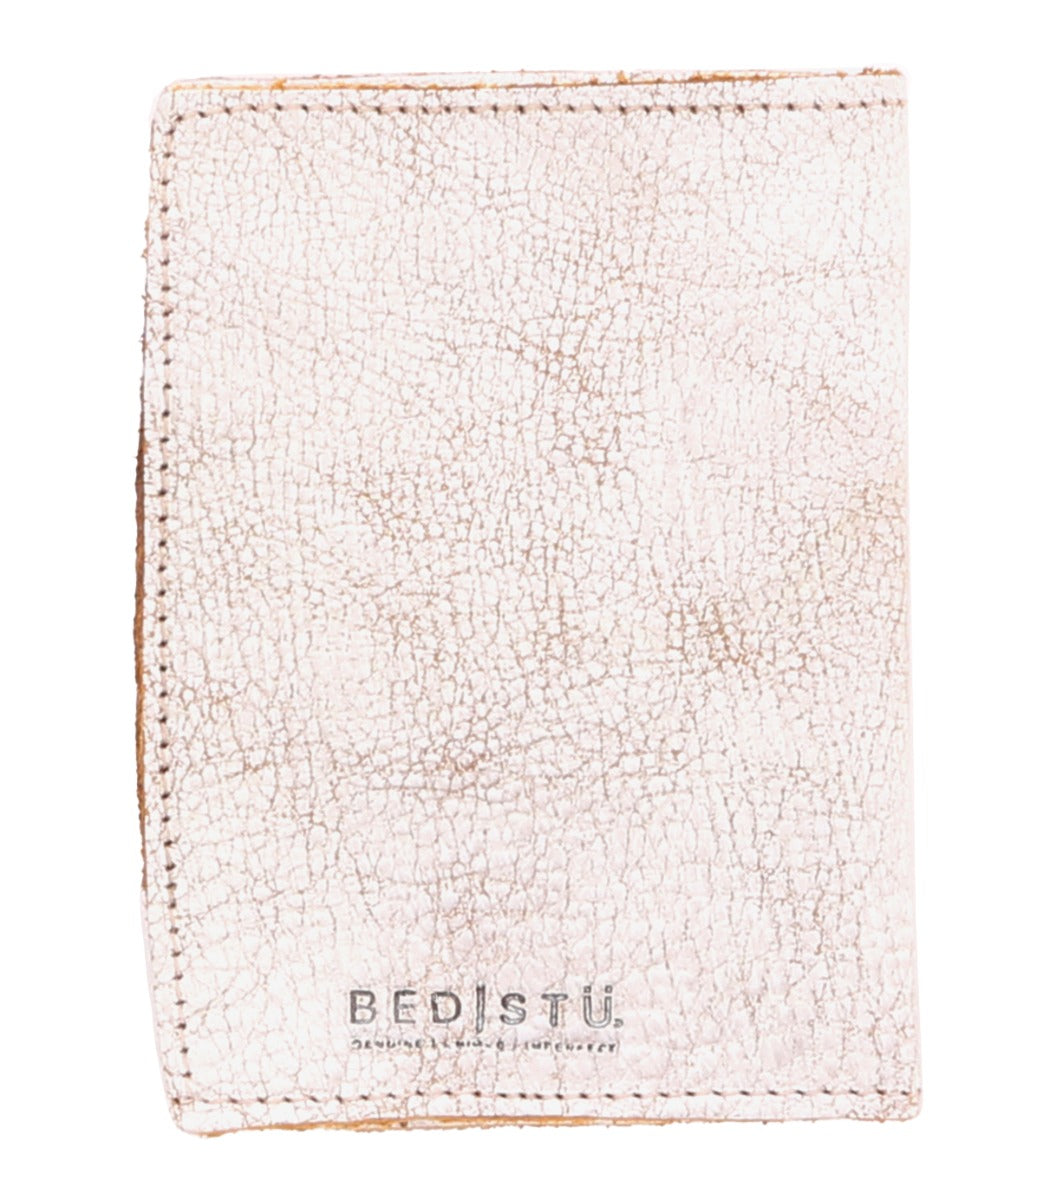 A white leather Stardust wallet with the word 'lifestyle' on it, by Bed Stu.